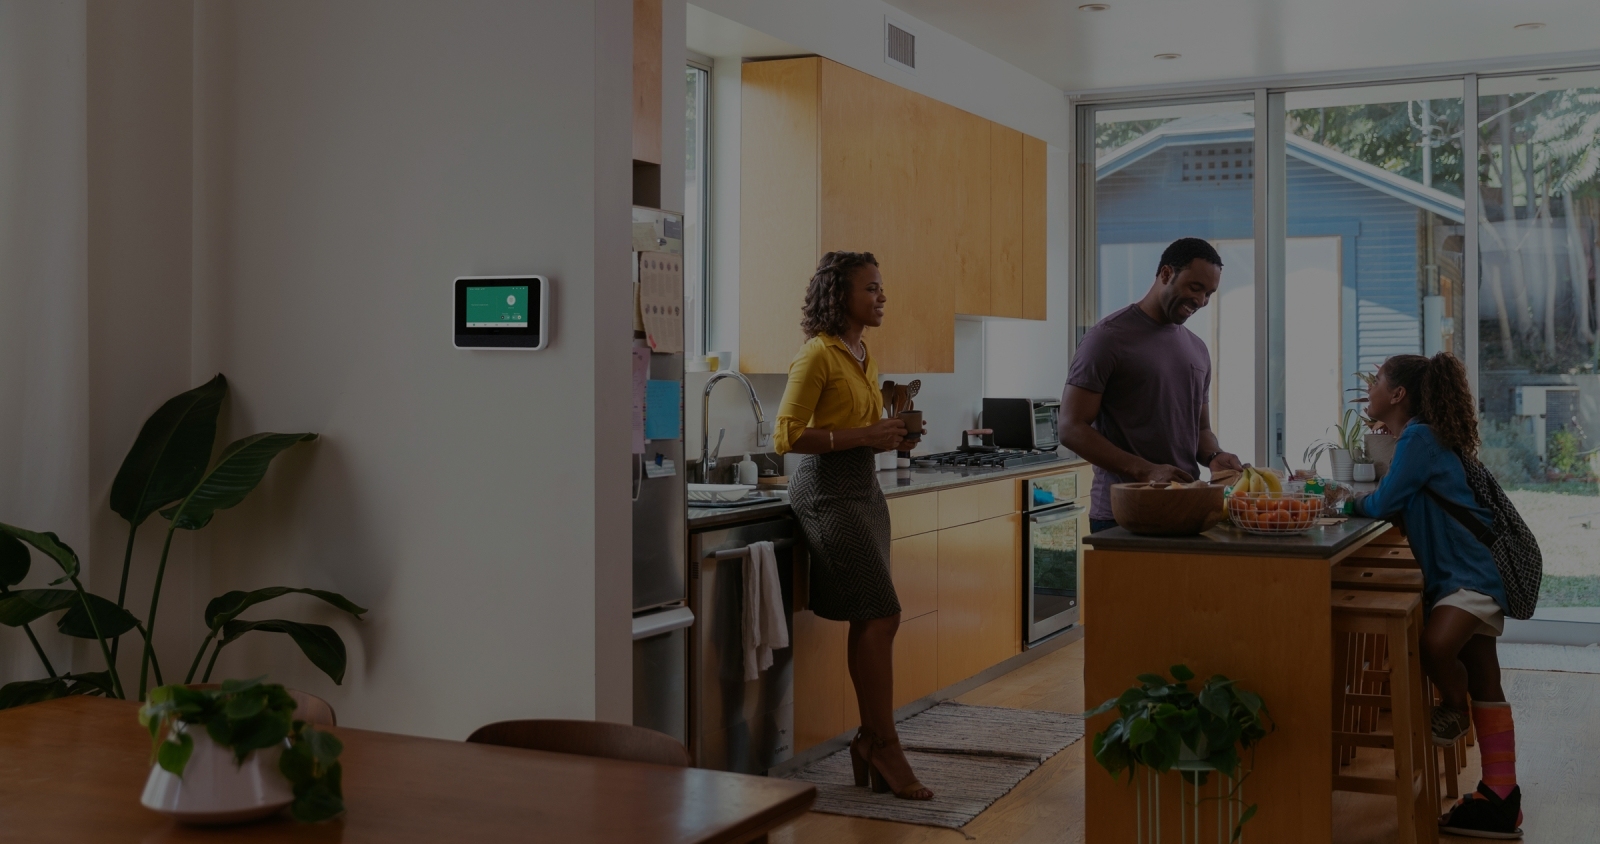 View of Vivint Smart Hub on the wall and a family in the kitchen